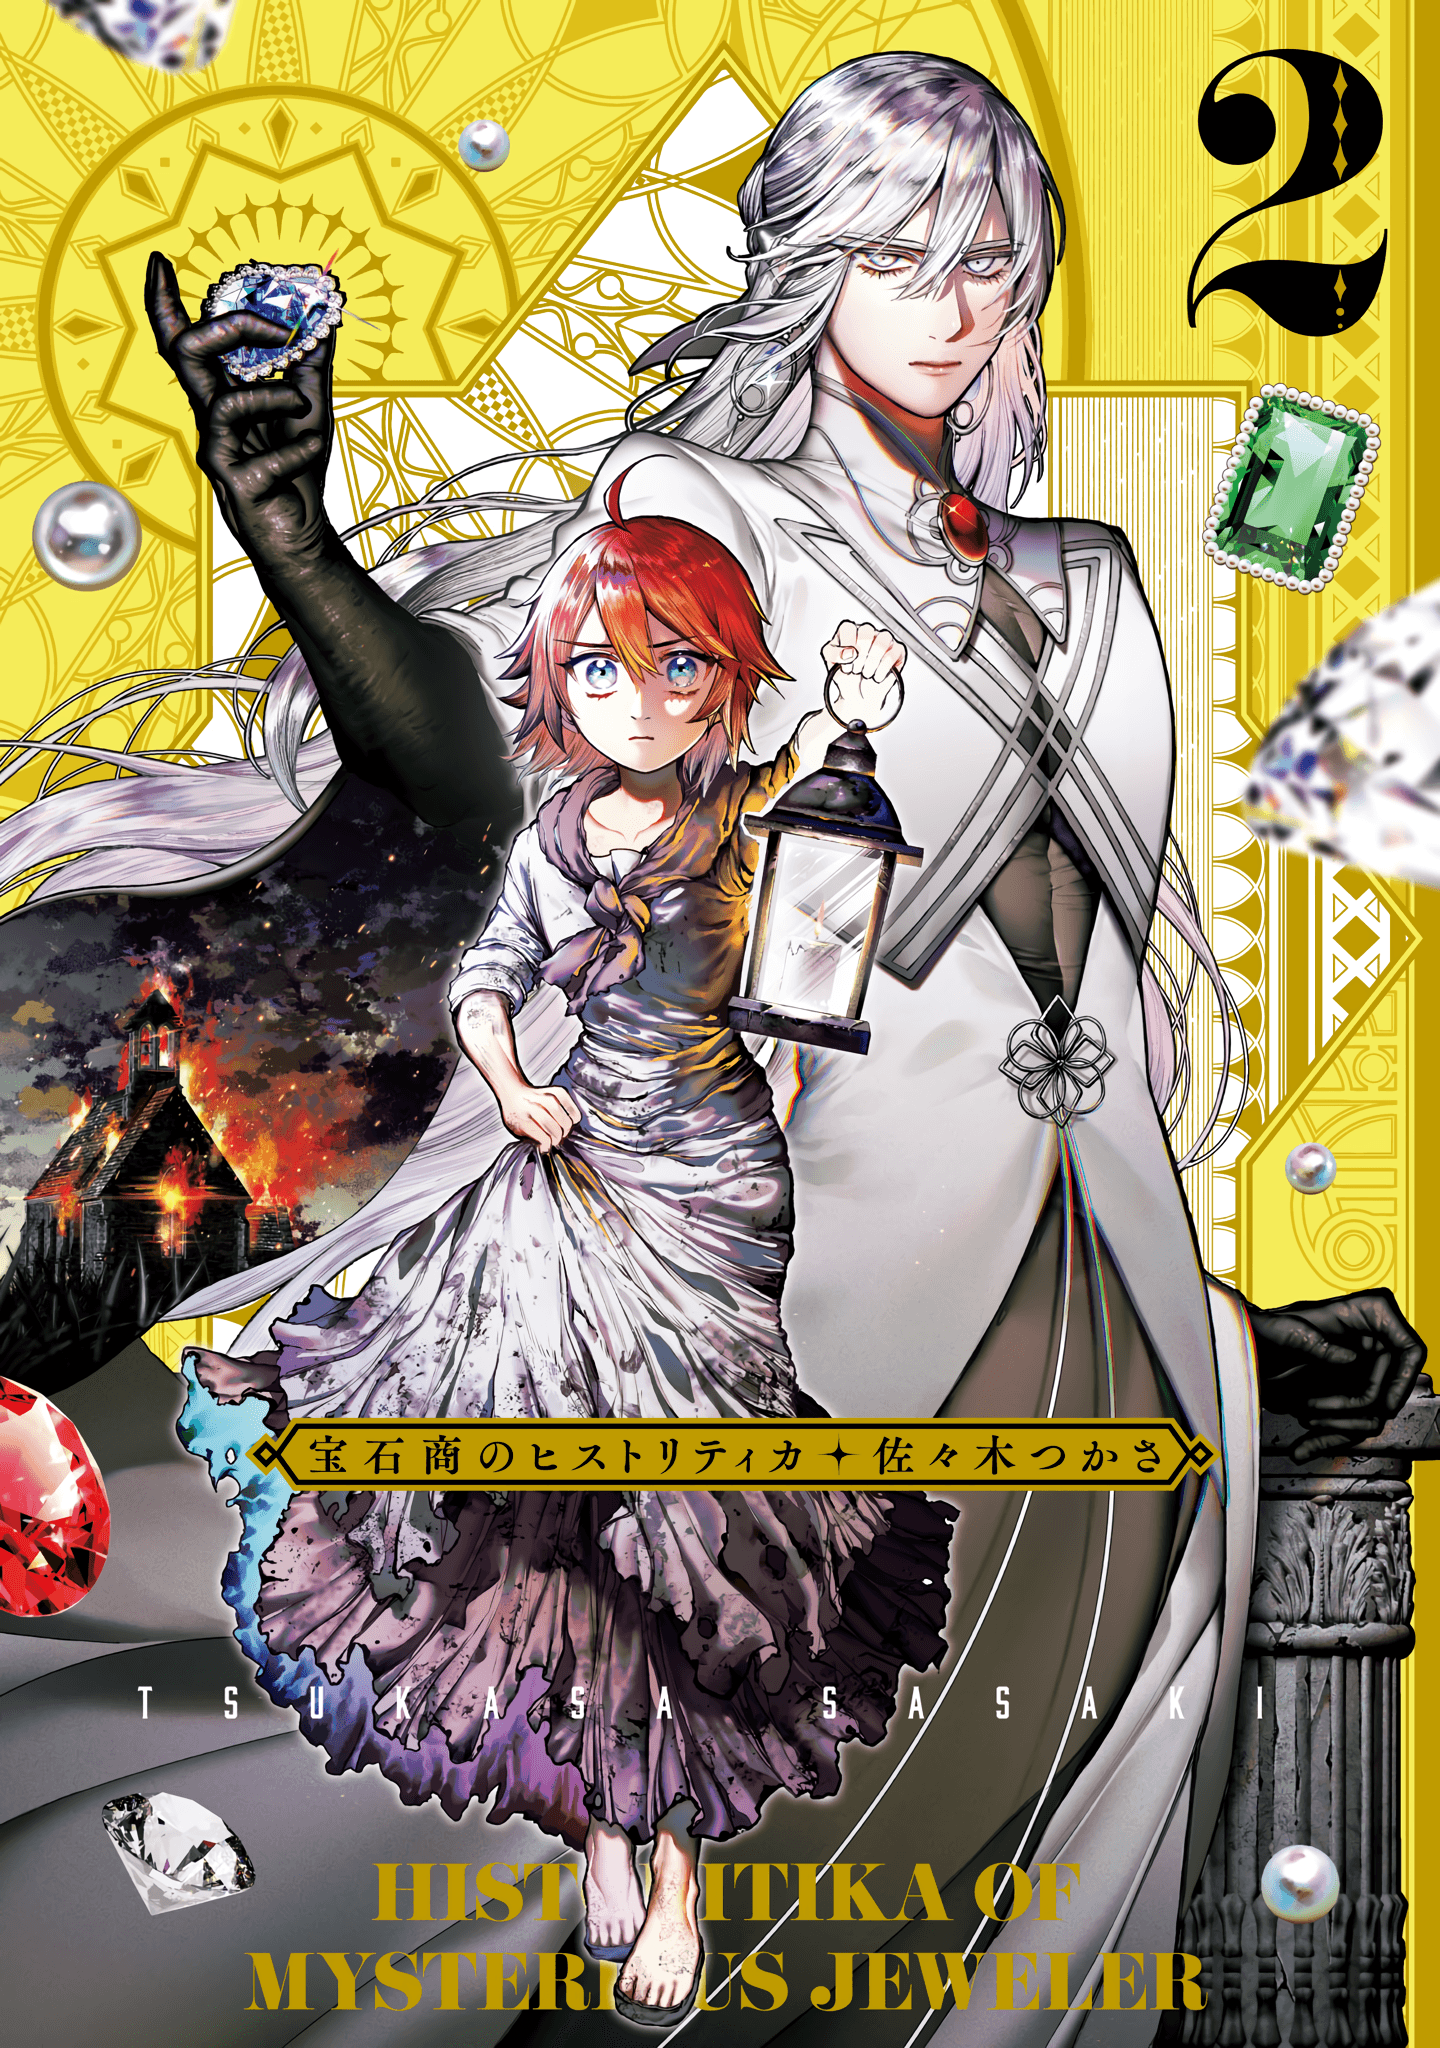 Historitika of the Mysterious Jeweler cover image